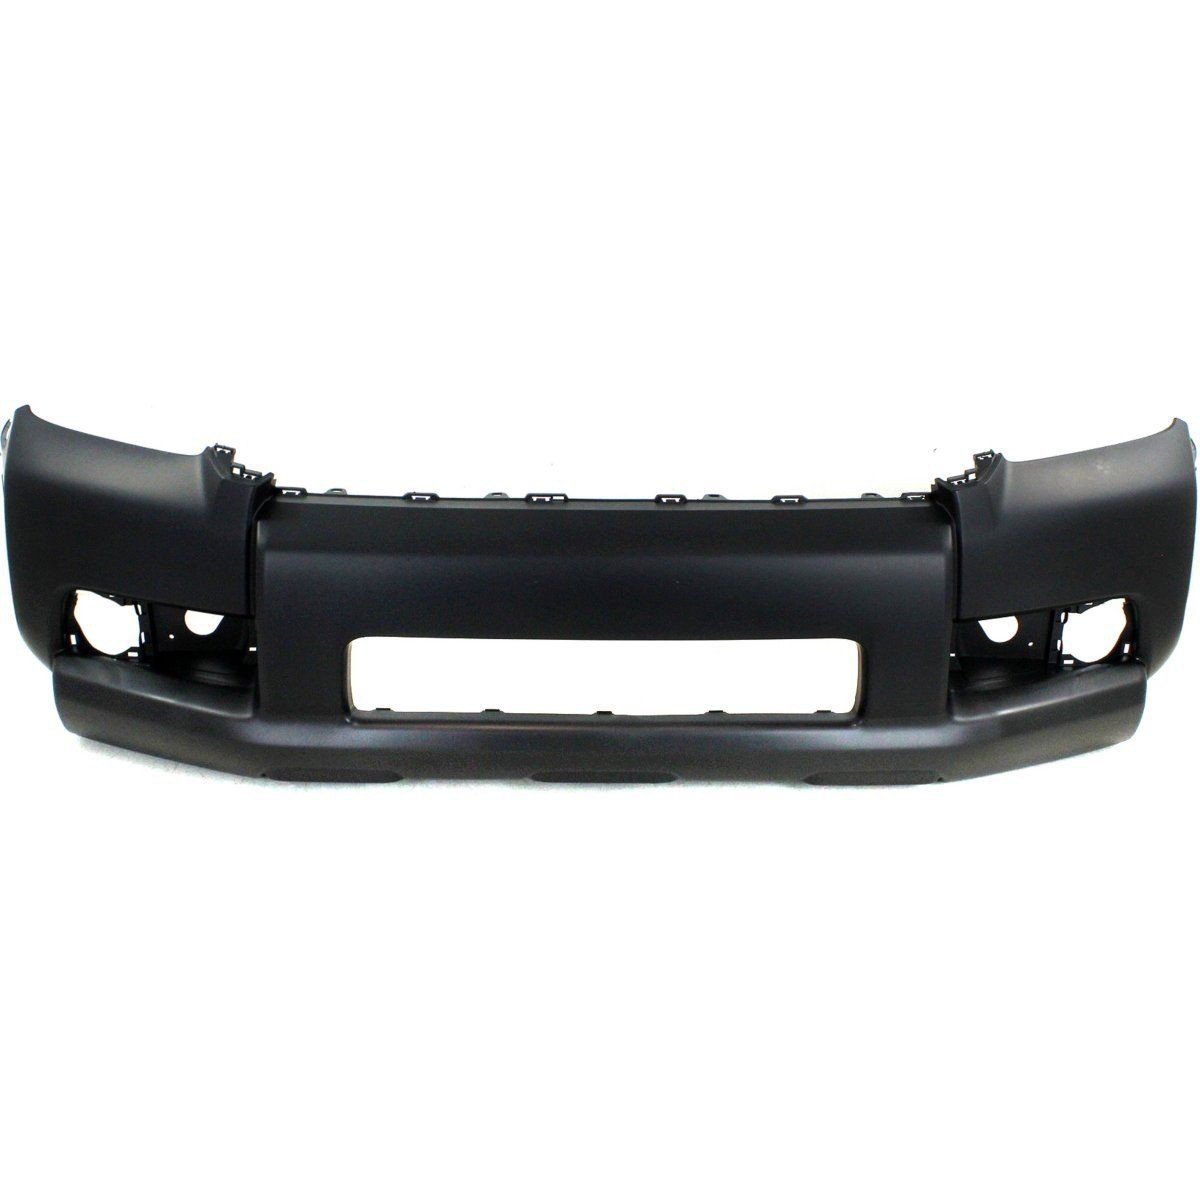 2010-2013 TOYOTA 4RUNNER Front Bumper Cover SR5  w/o Chrome Trim  w/o Trail Pkg  To 1-10 Painted to Match